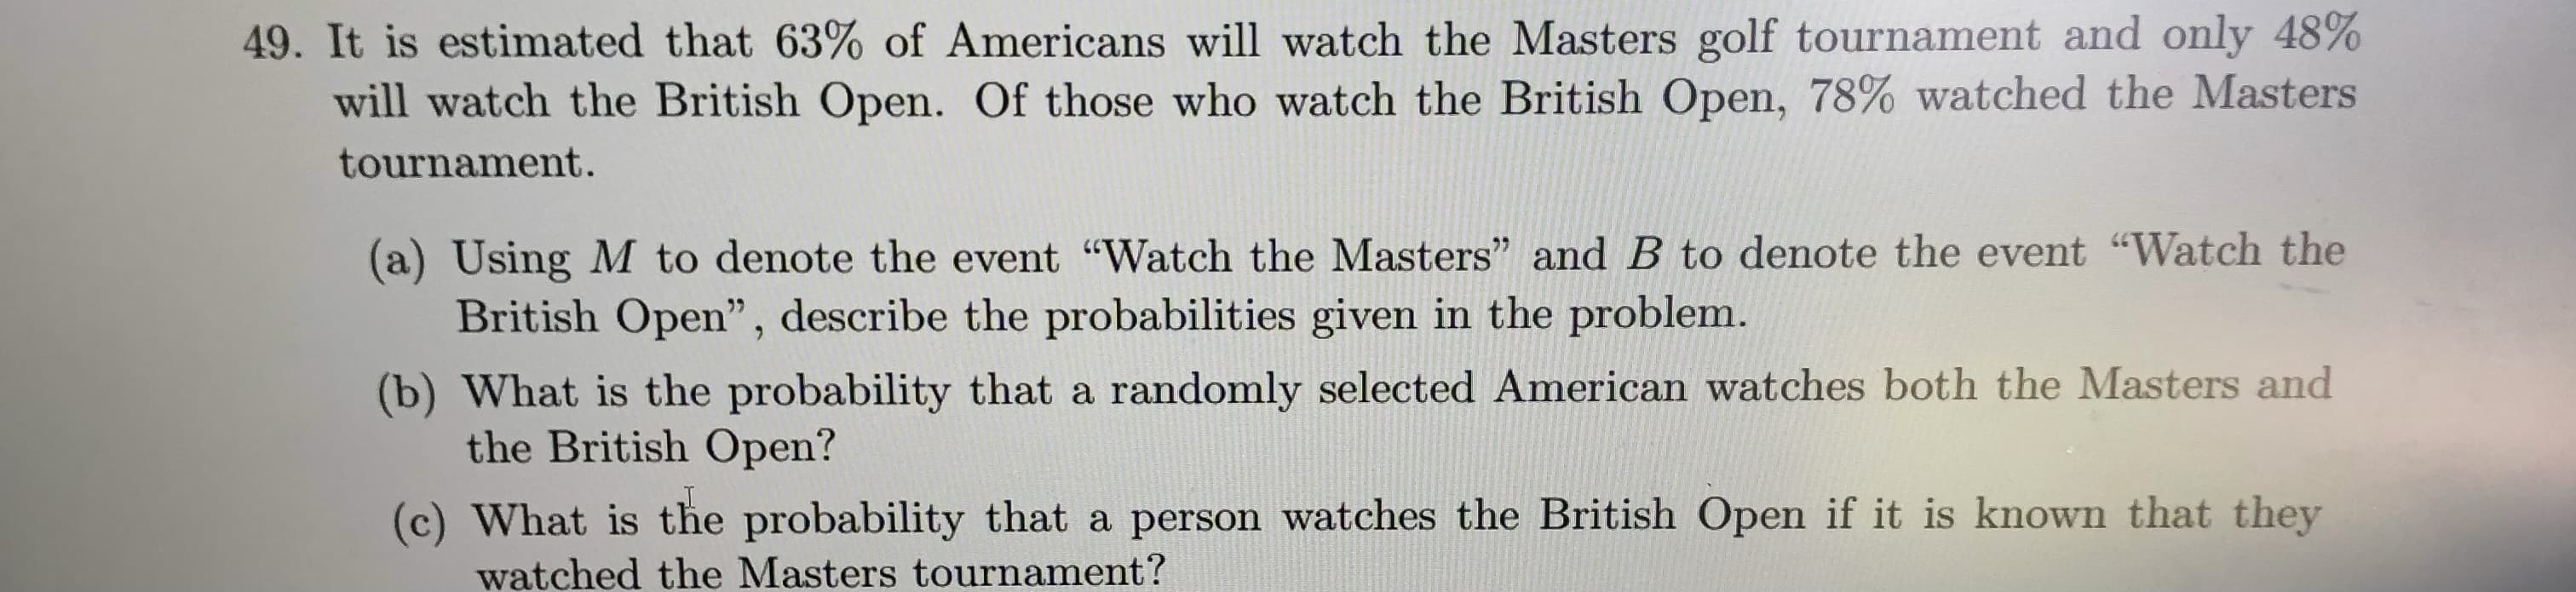 will watch the British Open. Of those who watch the British Open, 78% watched the Master
tournament.
(a) Using M to denote the event "Watch the Masters" and B to denote the event "Watch the
British Open", describe the probabilities given in the problem.
(b) What is the probability that a randomly selected American watches both the Masters and
the British Open?
(c) What is the probability that a person watches the British Open if it is known that they
